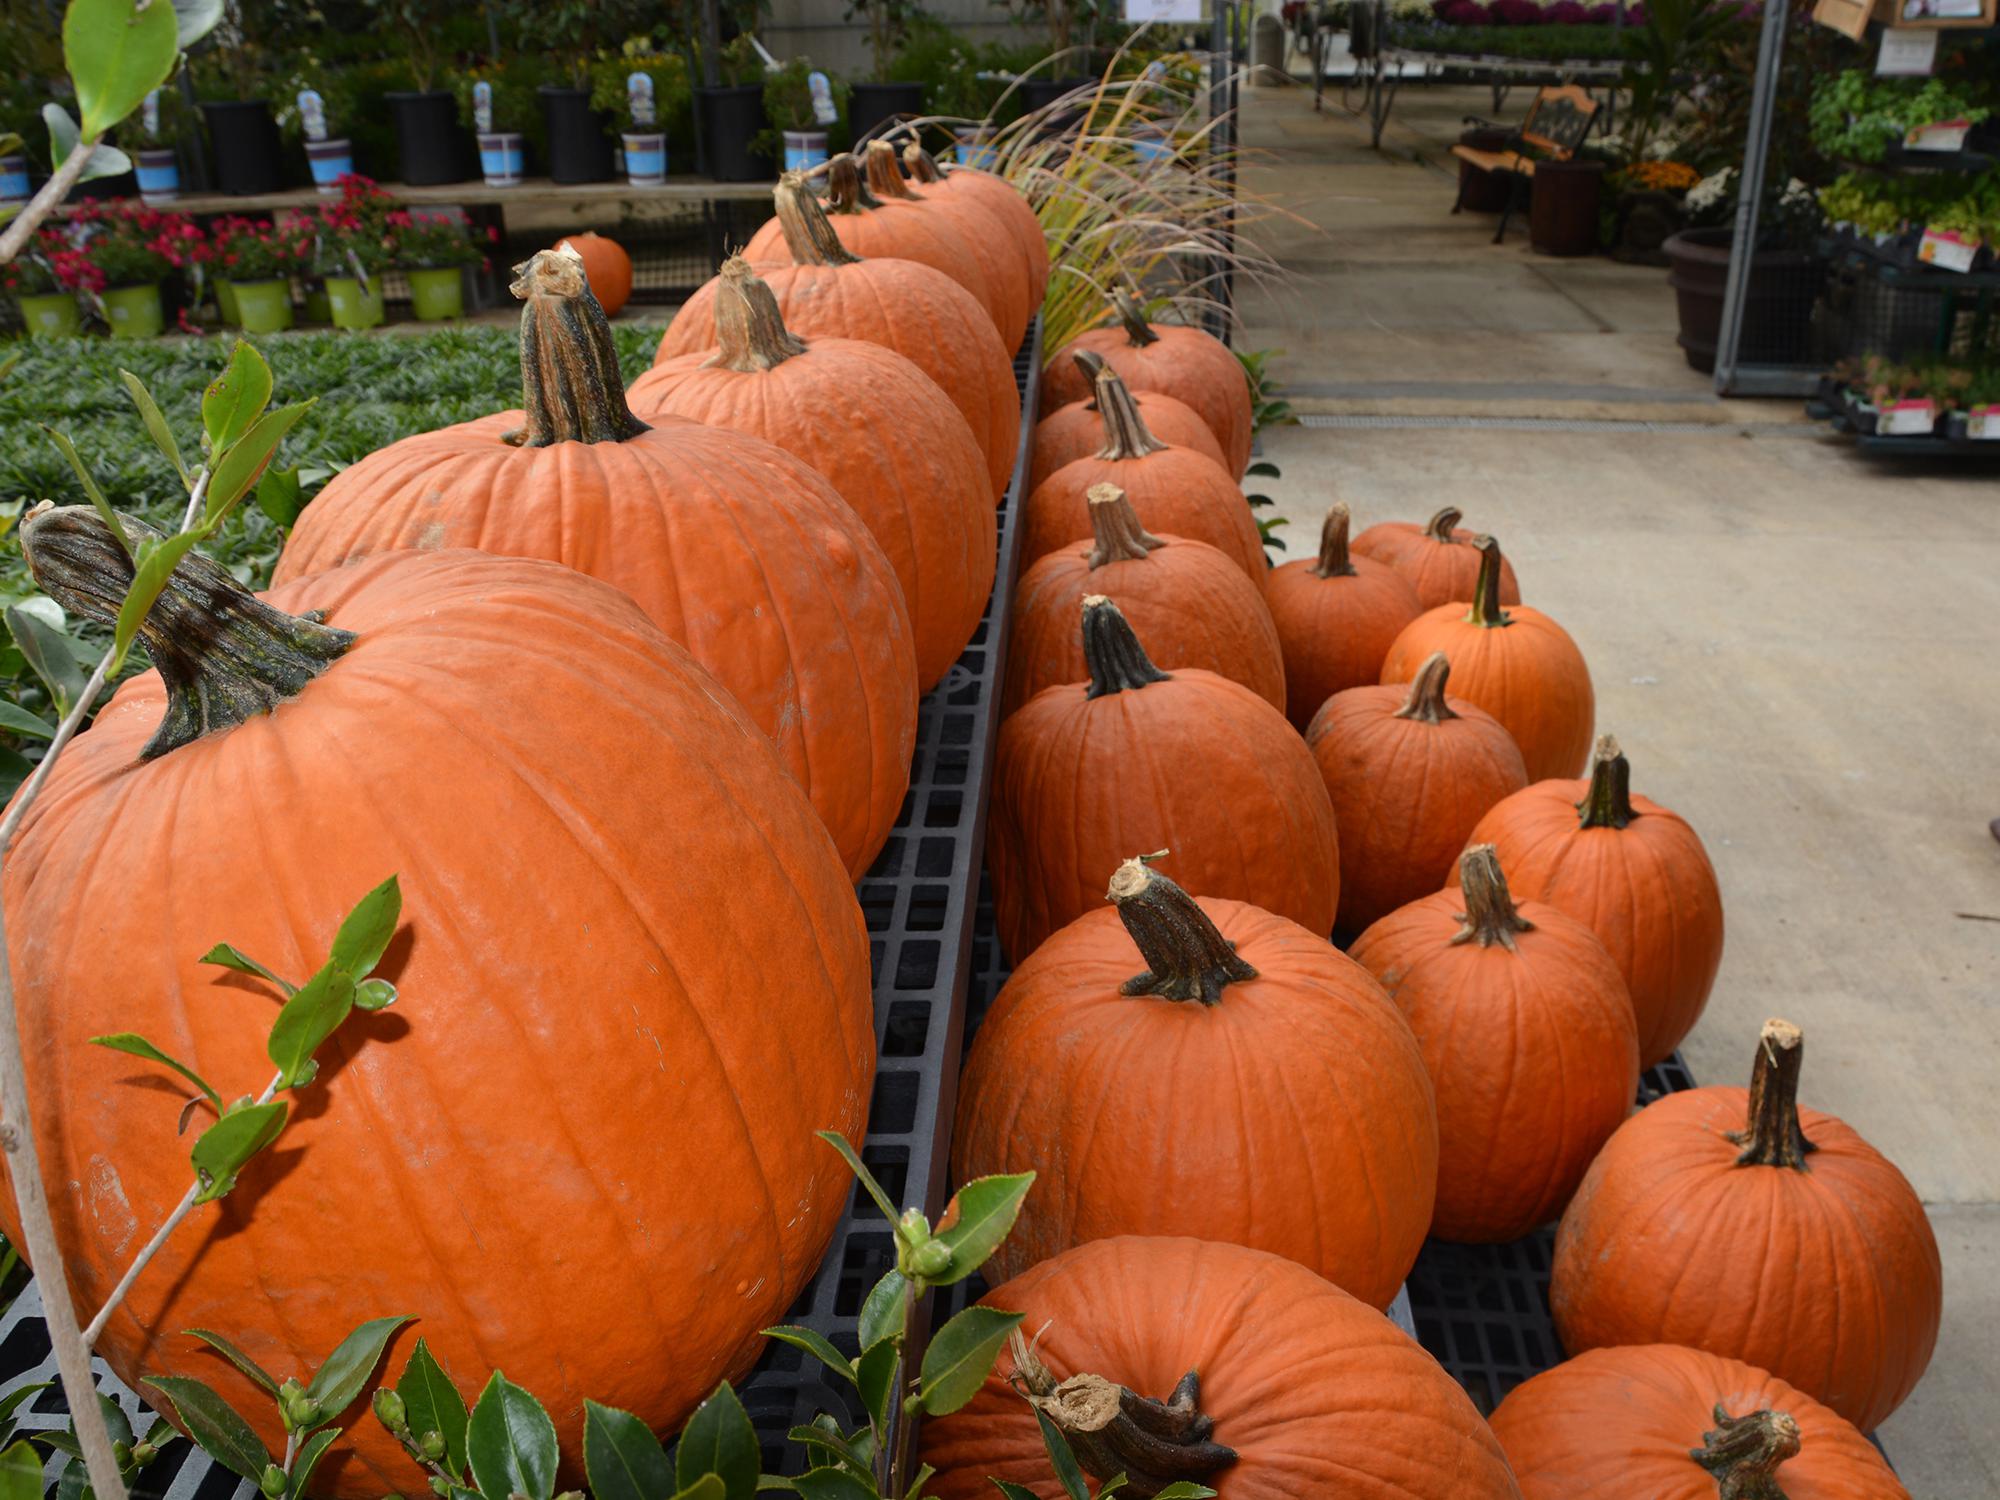 Large pumpkins just right for jack-o-lanterns await selection at a store in Starkville, Mississippi, on Oct. 23, 2015. (Photo by MSU Extension Service/Linda Breazeale)